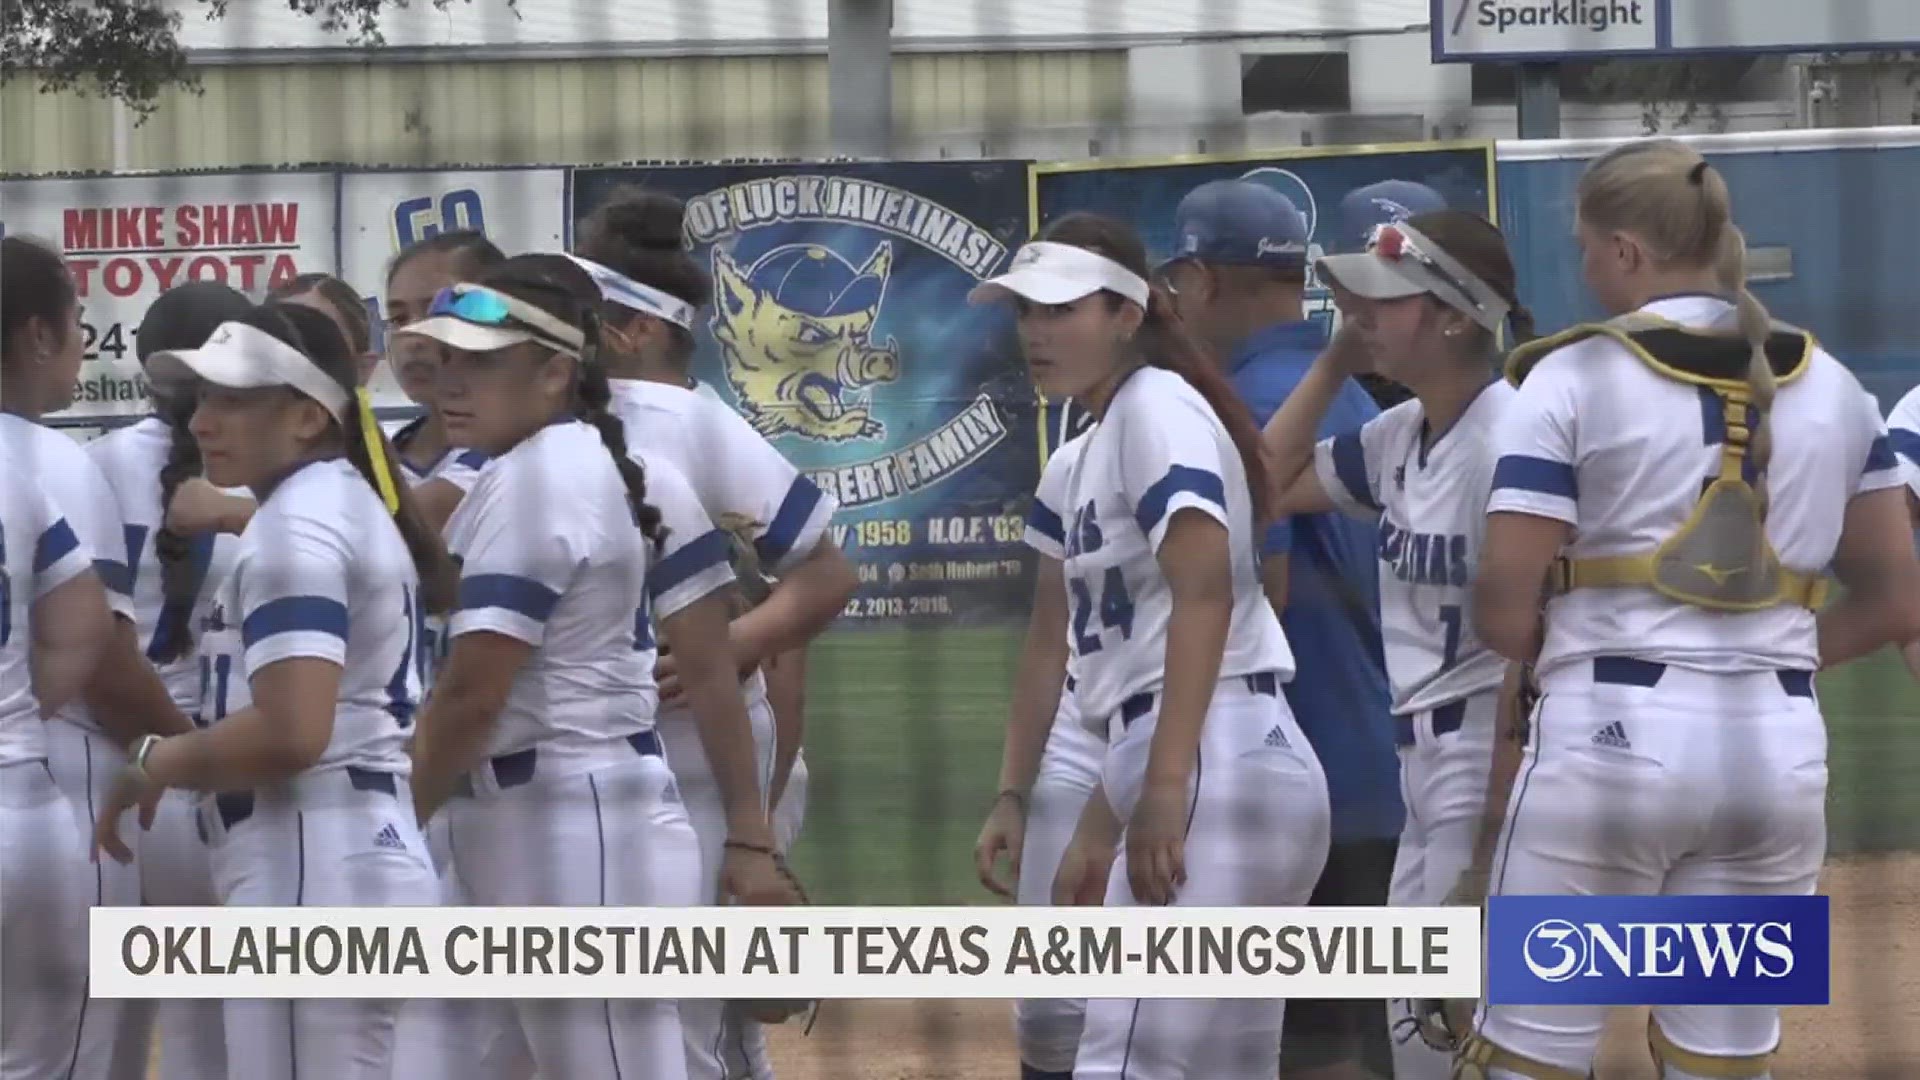 Texas A&M-Kingsville struggled to push runs across in a pair of losses to Oklahoma Christian.